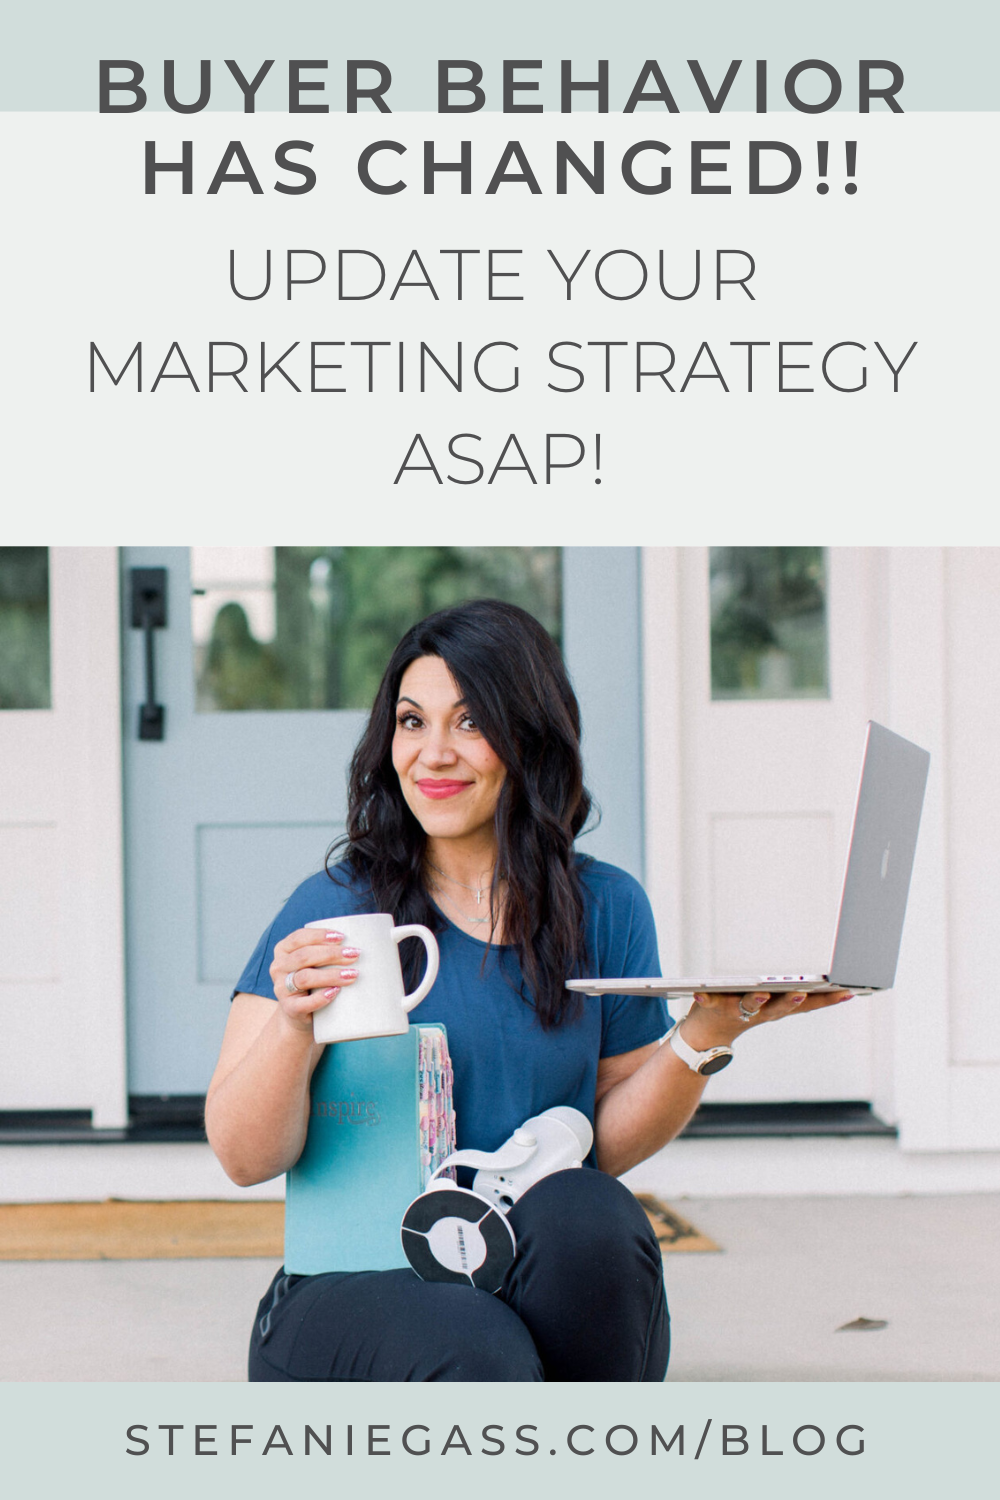 smiling brown haired woman holding her phone, podcast microphone, and laptop, Text reads:  Buyer Behavior has changed!! Update your marketing strategy ASAP! Stefanie Gass